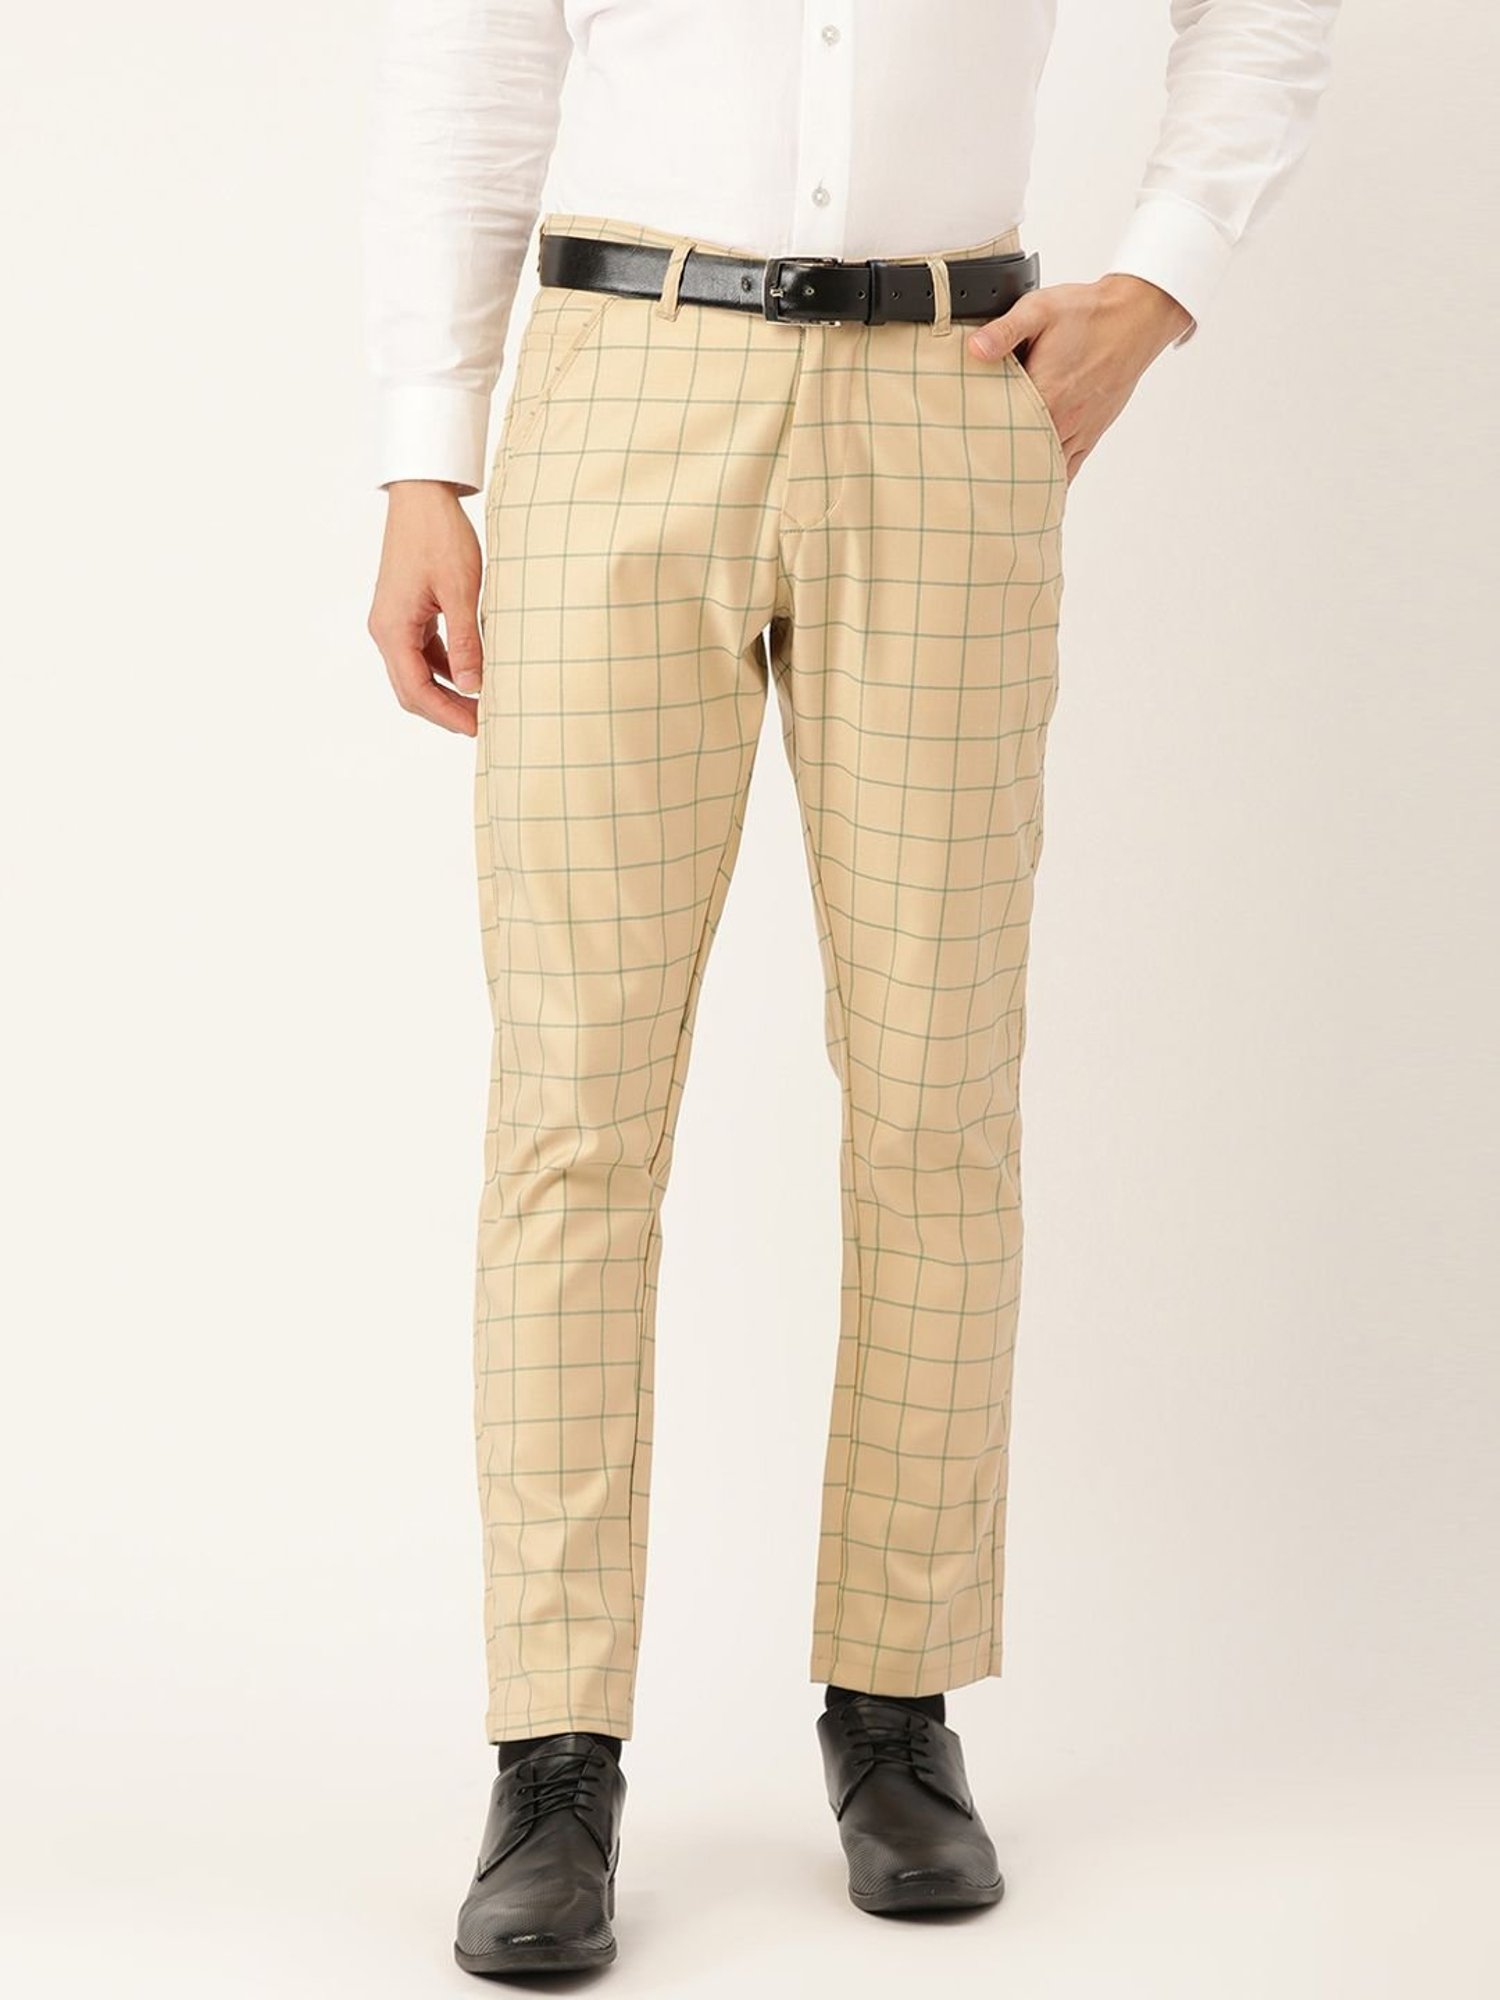 Buy LOUIS PHILIPPE Checks Polyester Viscose Slim Fit Men's Work Wear  Trousers | Shoppers Stop